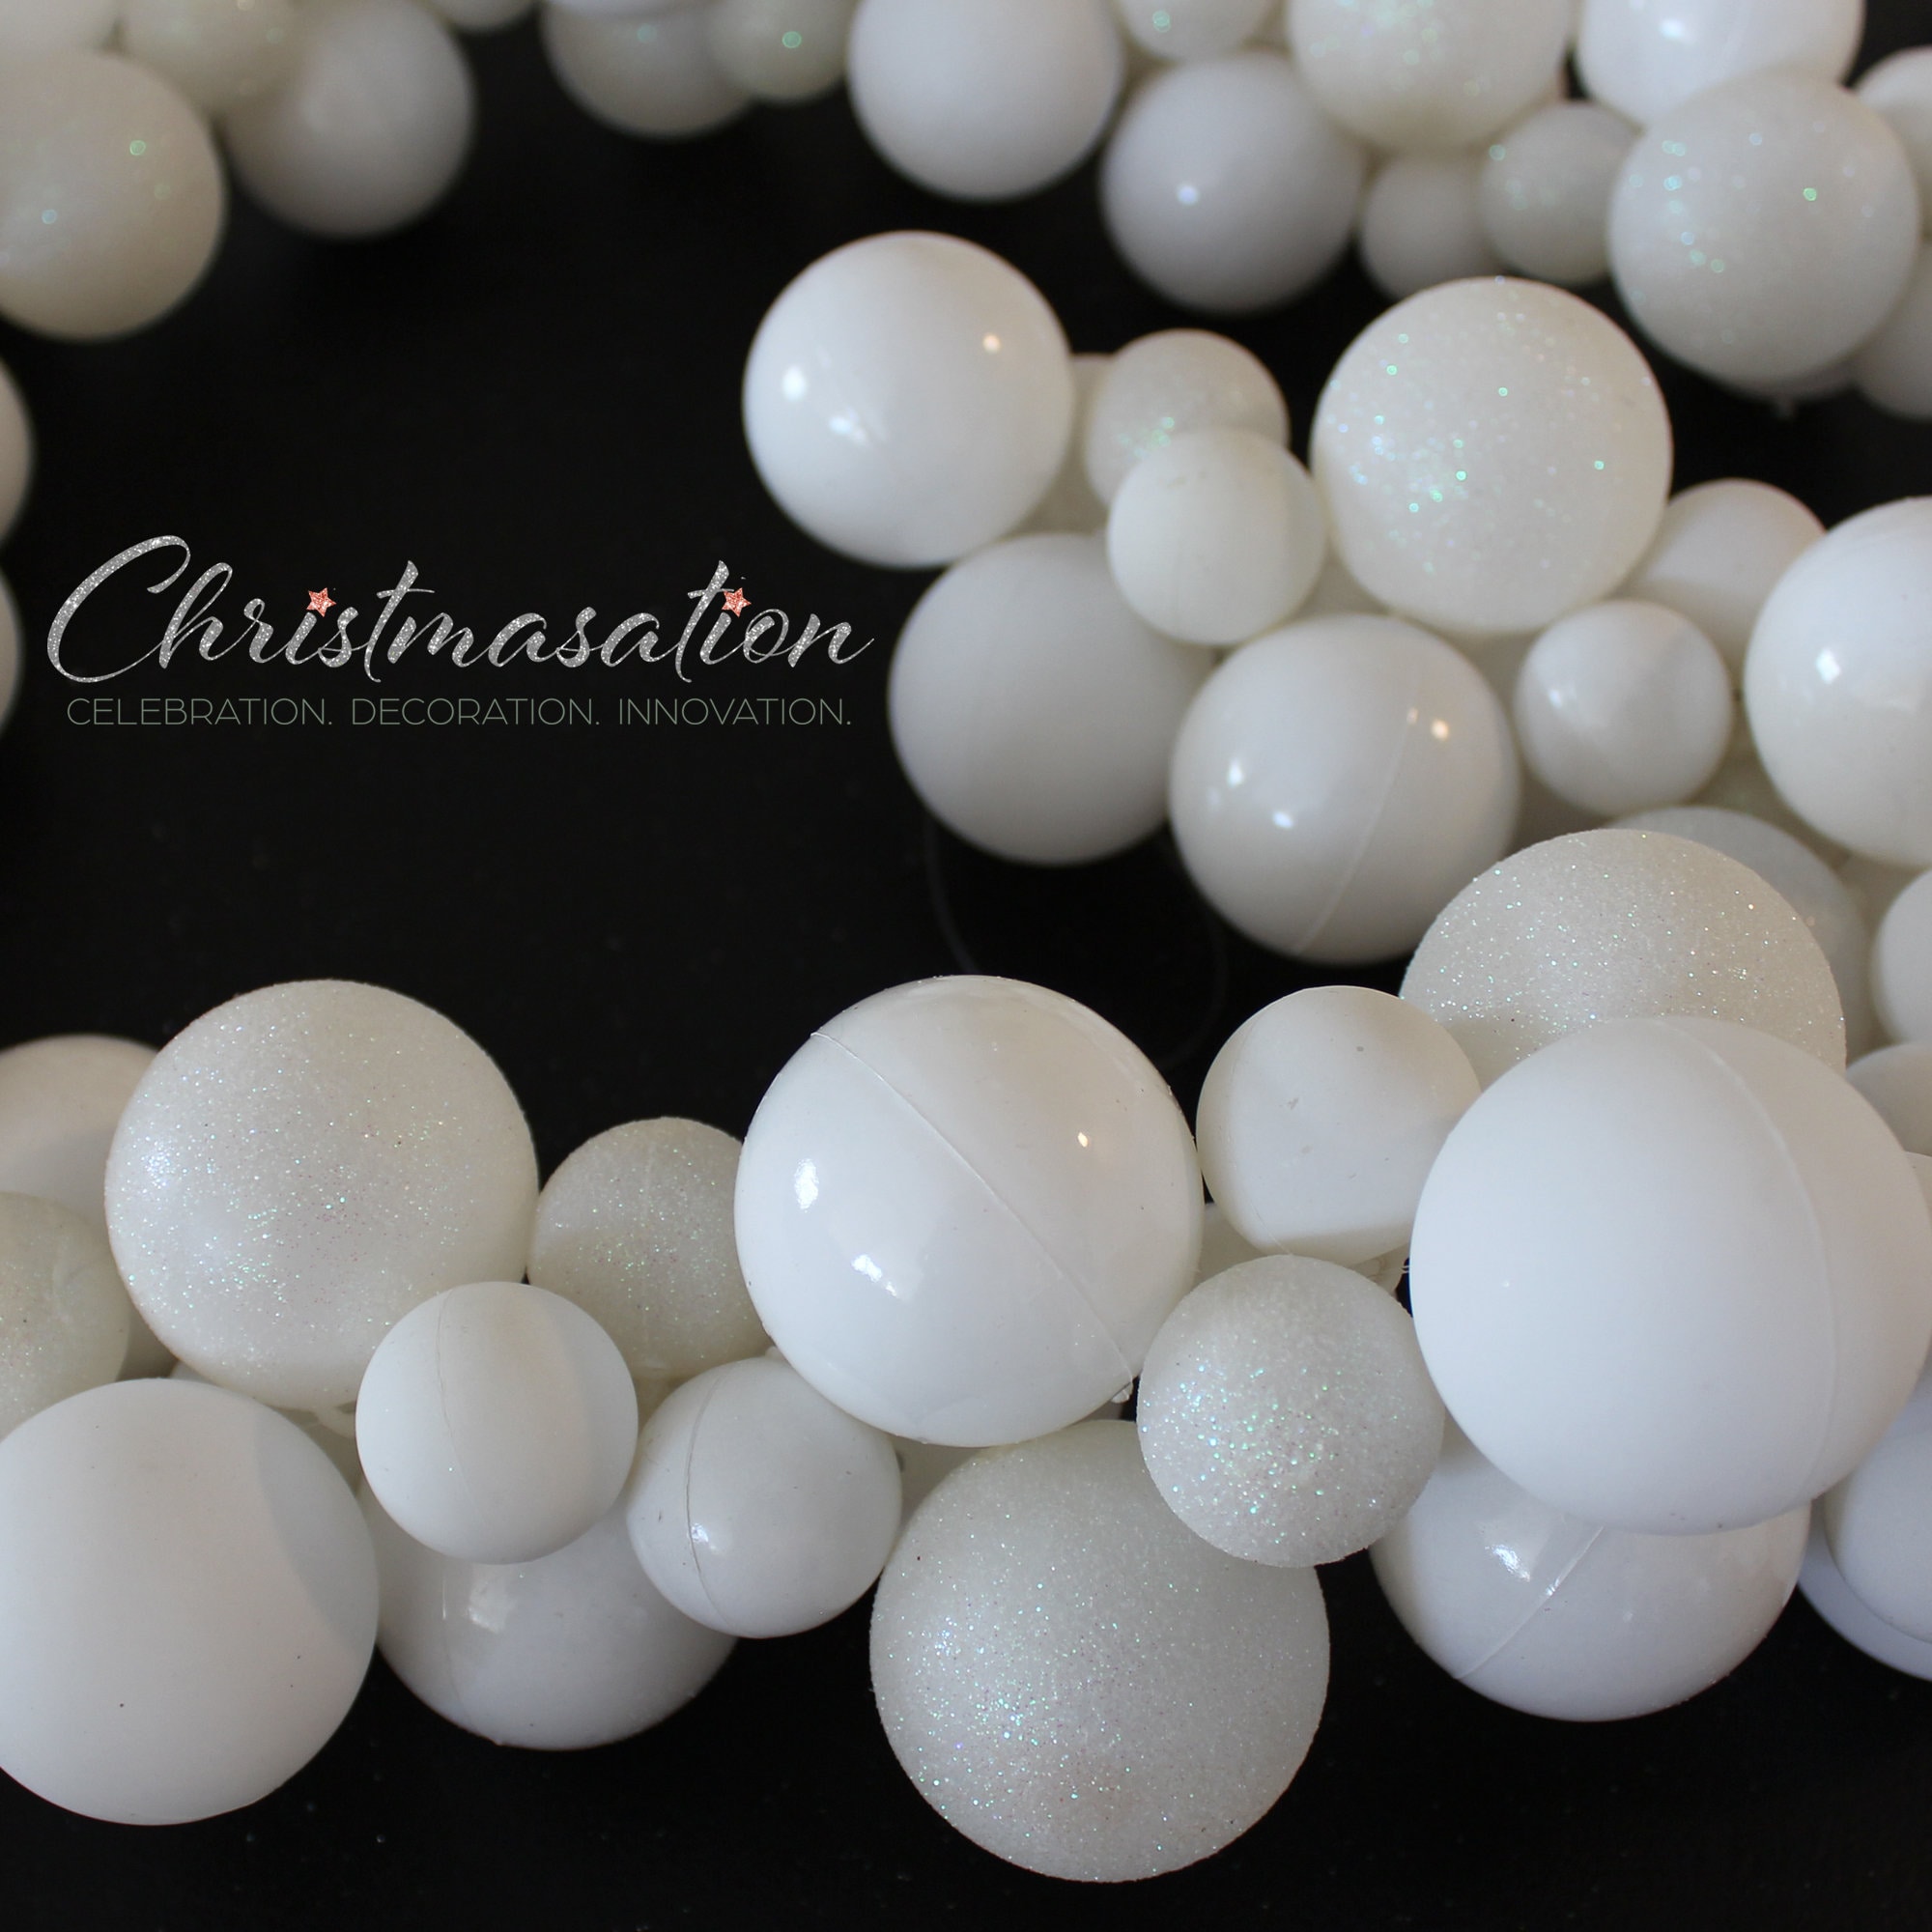 66 FT. Pearl Garland 10mm White Christmas Tree Decorations String Garlands  Old Decor Sale Wholesale Garlands Gatsby Glam Pearls Gift Favor 